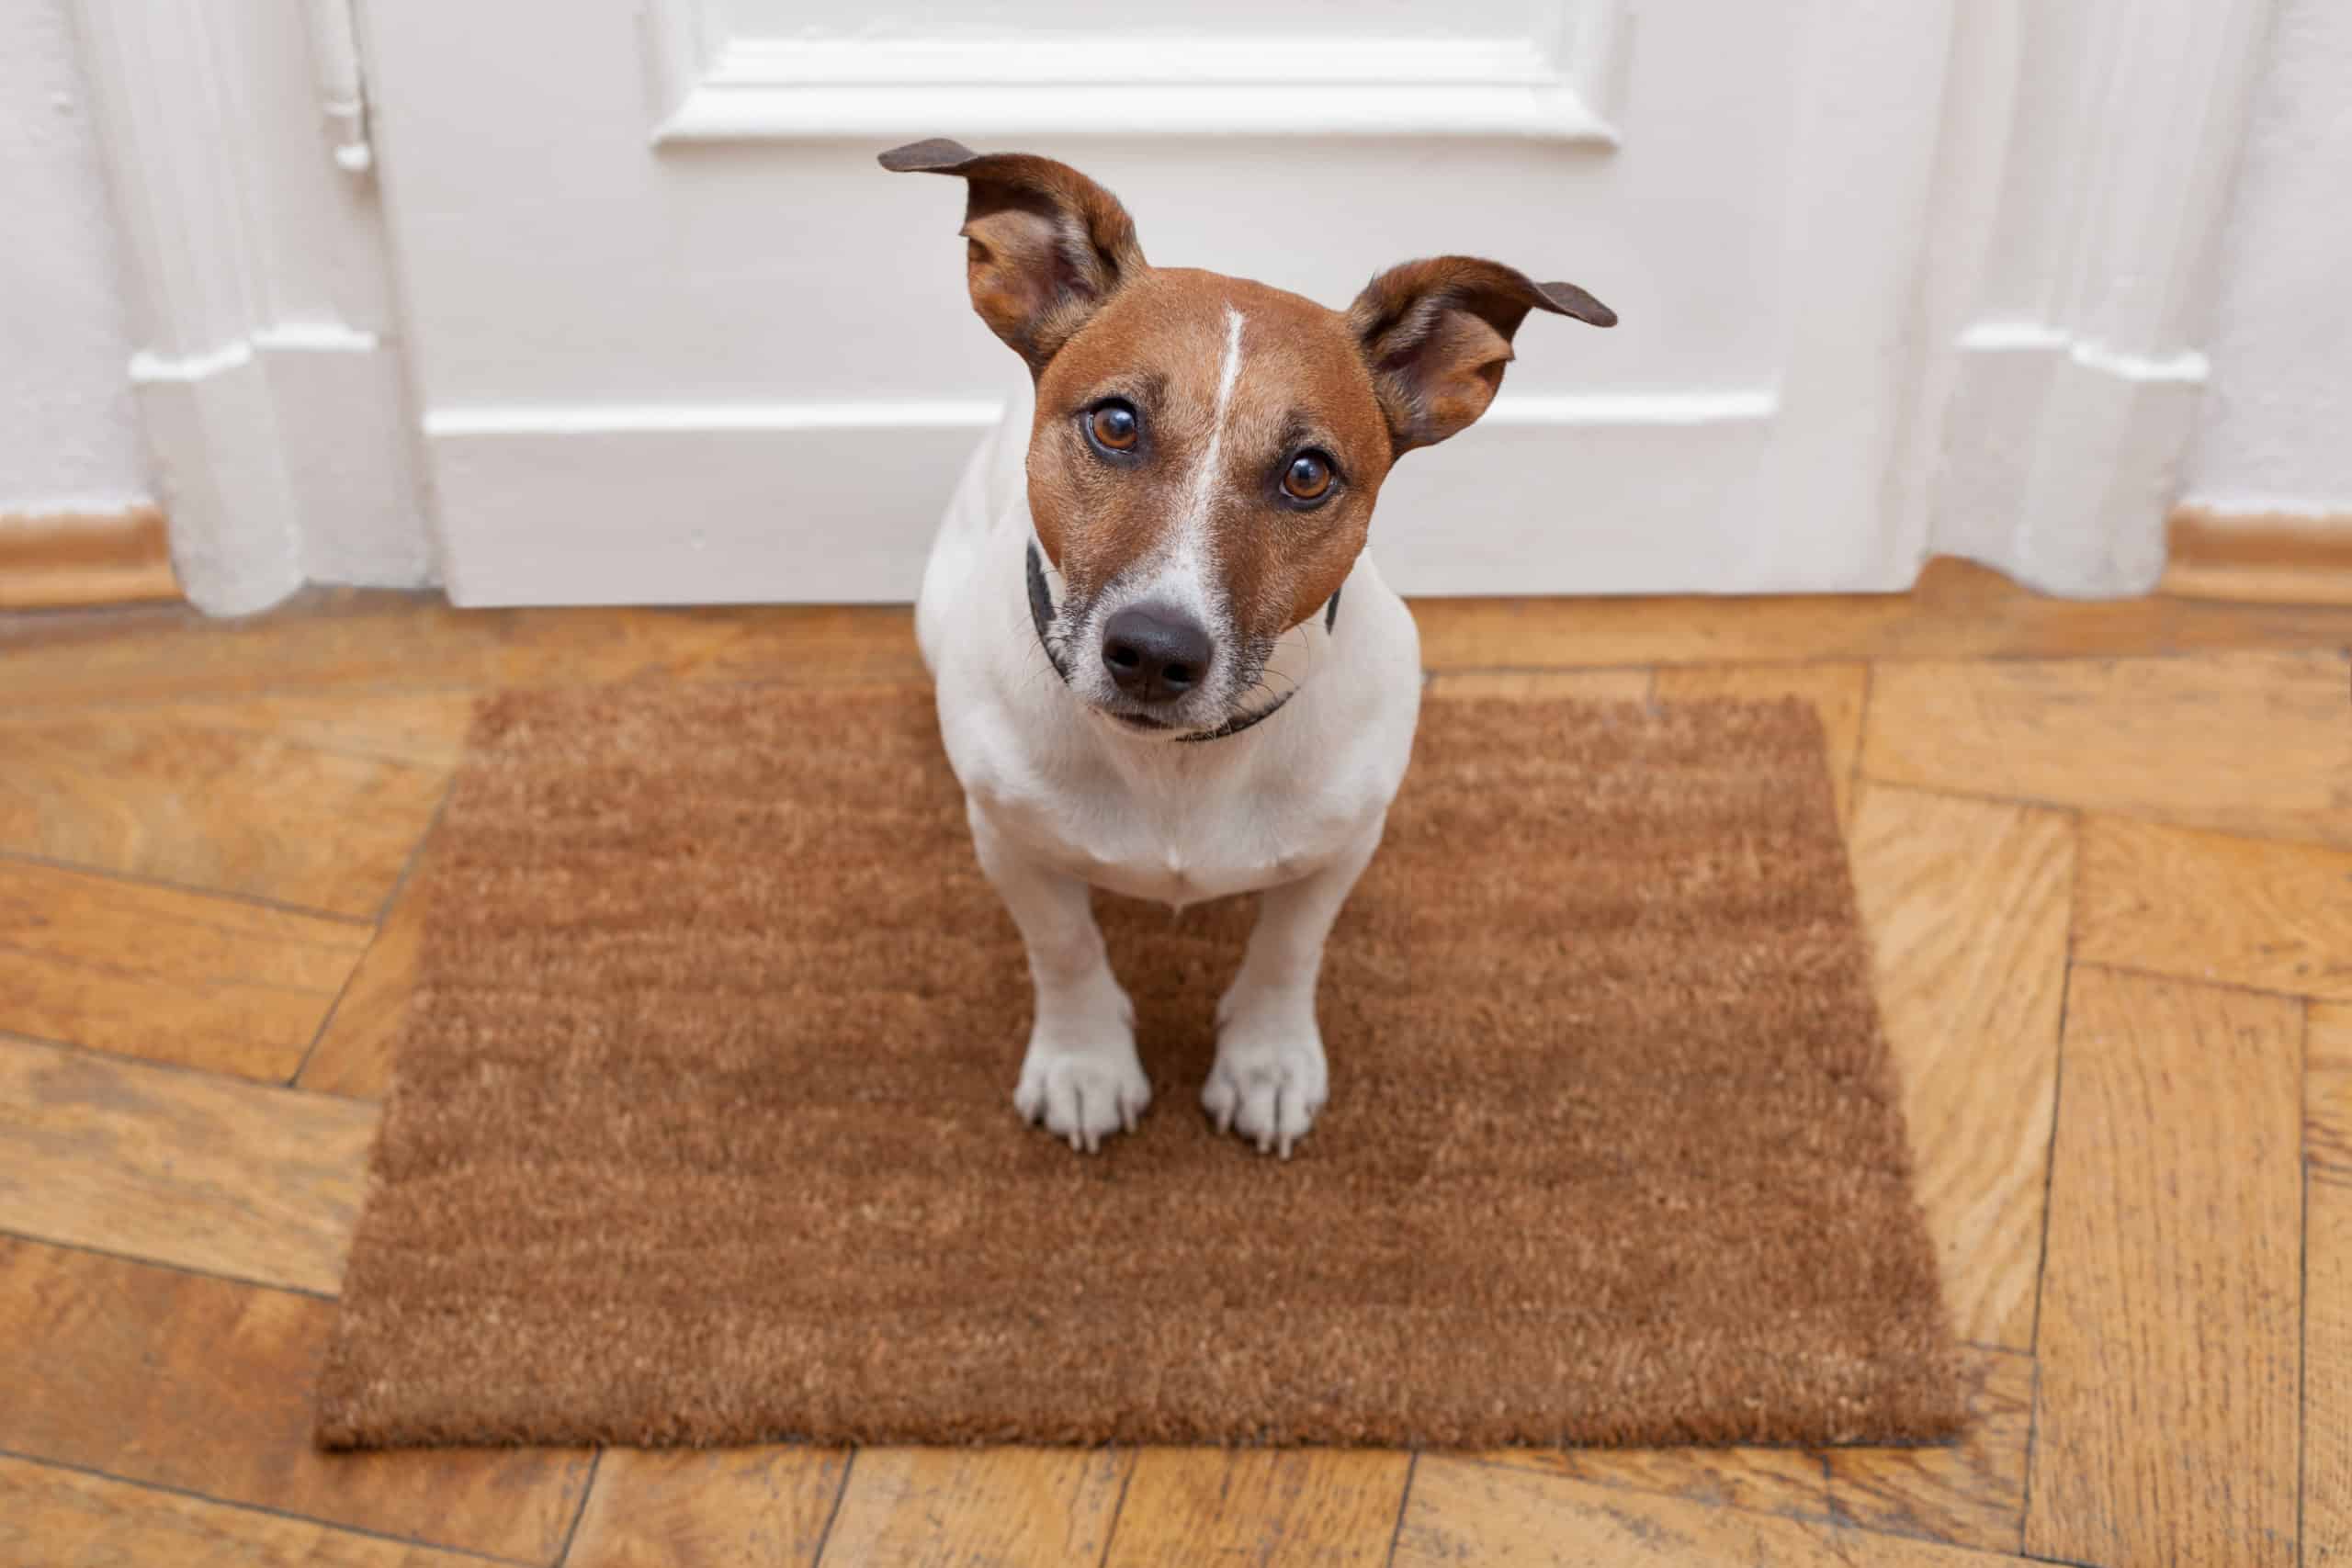 Should you let your dog roam the house?